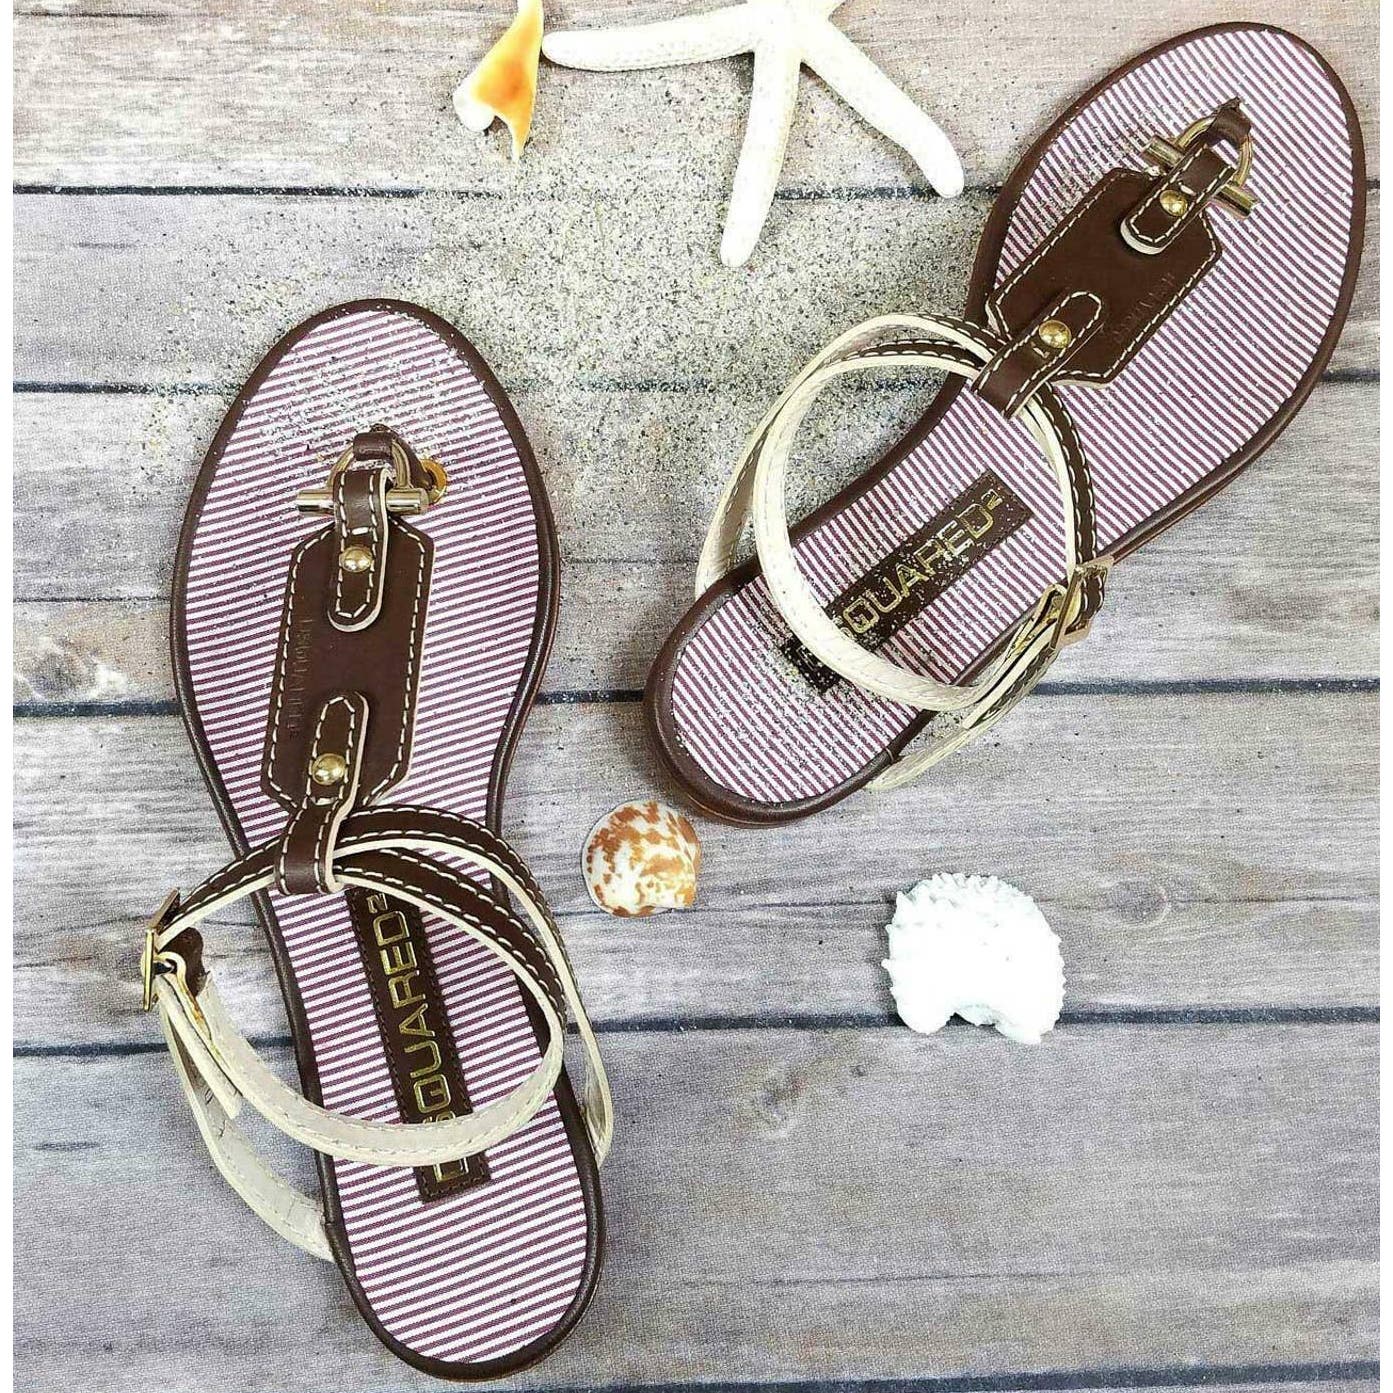 Dsquared2 Women US 6 Gold Brown Leather T-Strap Flat Thong Sandals